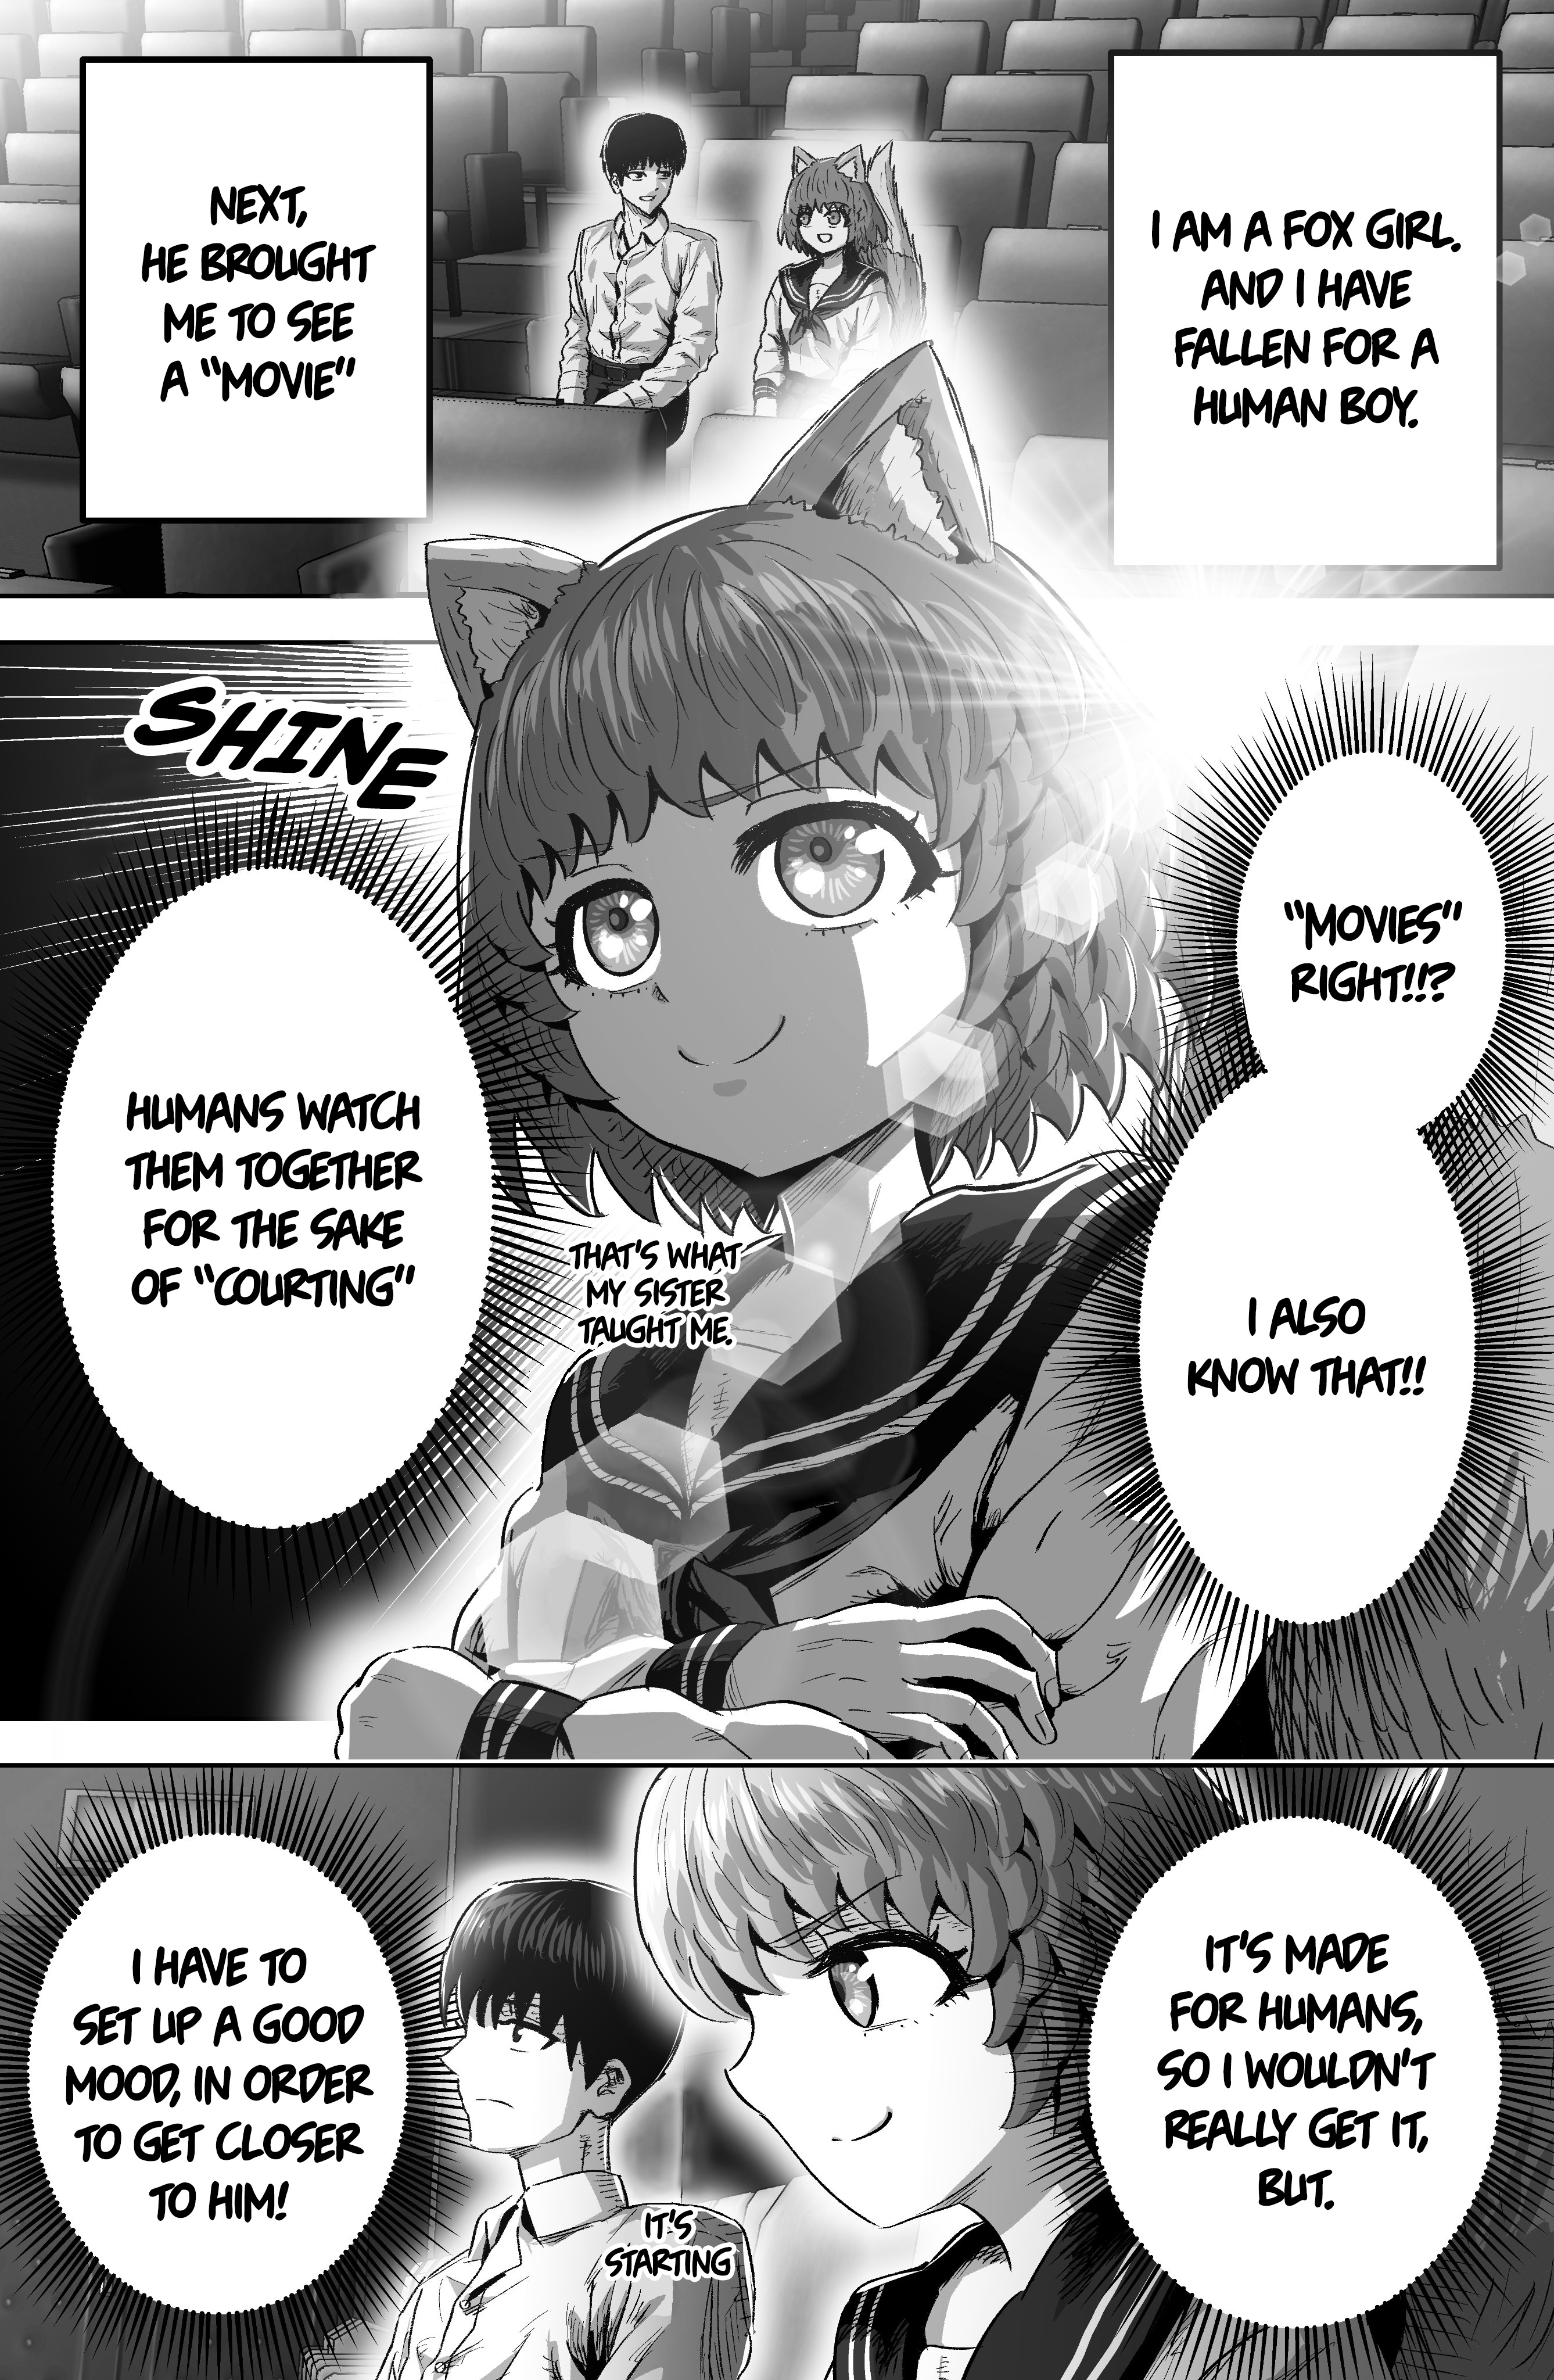 The Fox Girl Who Wants To Get Chummy With The Human Boy She Likes - Page 1